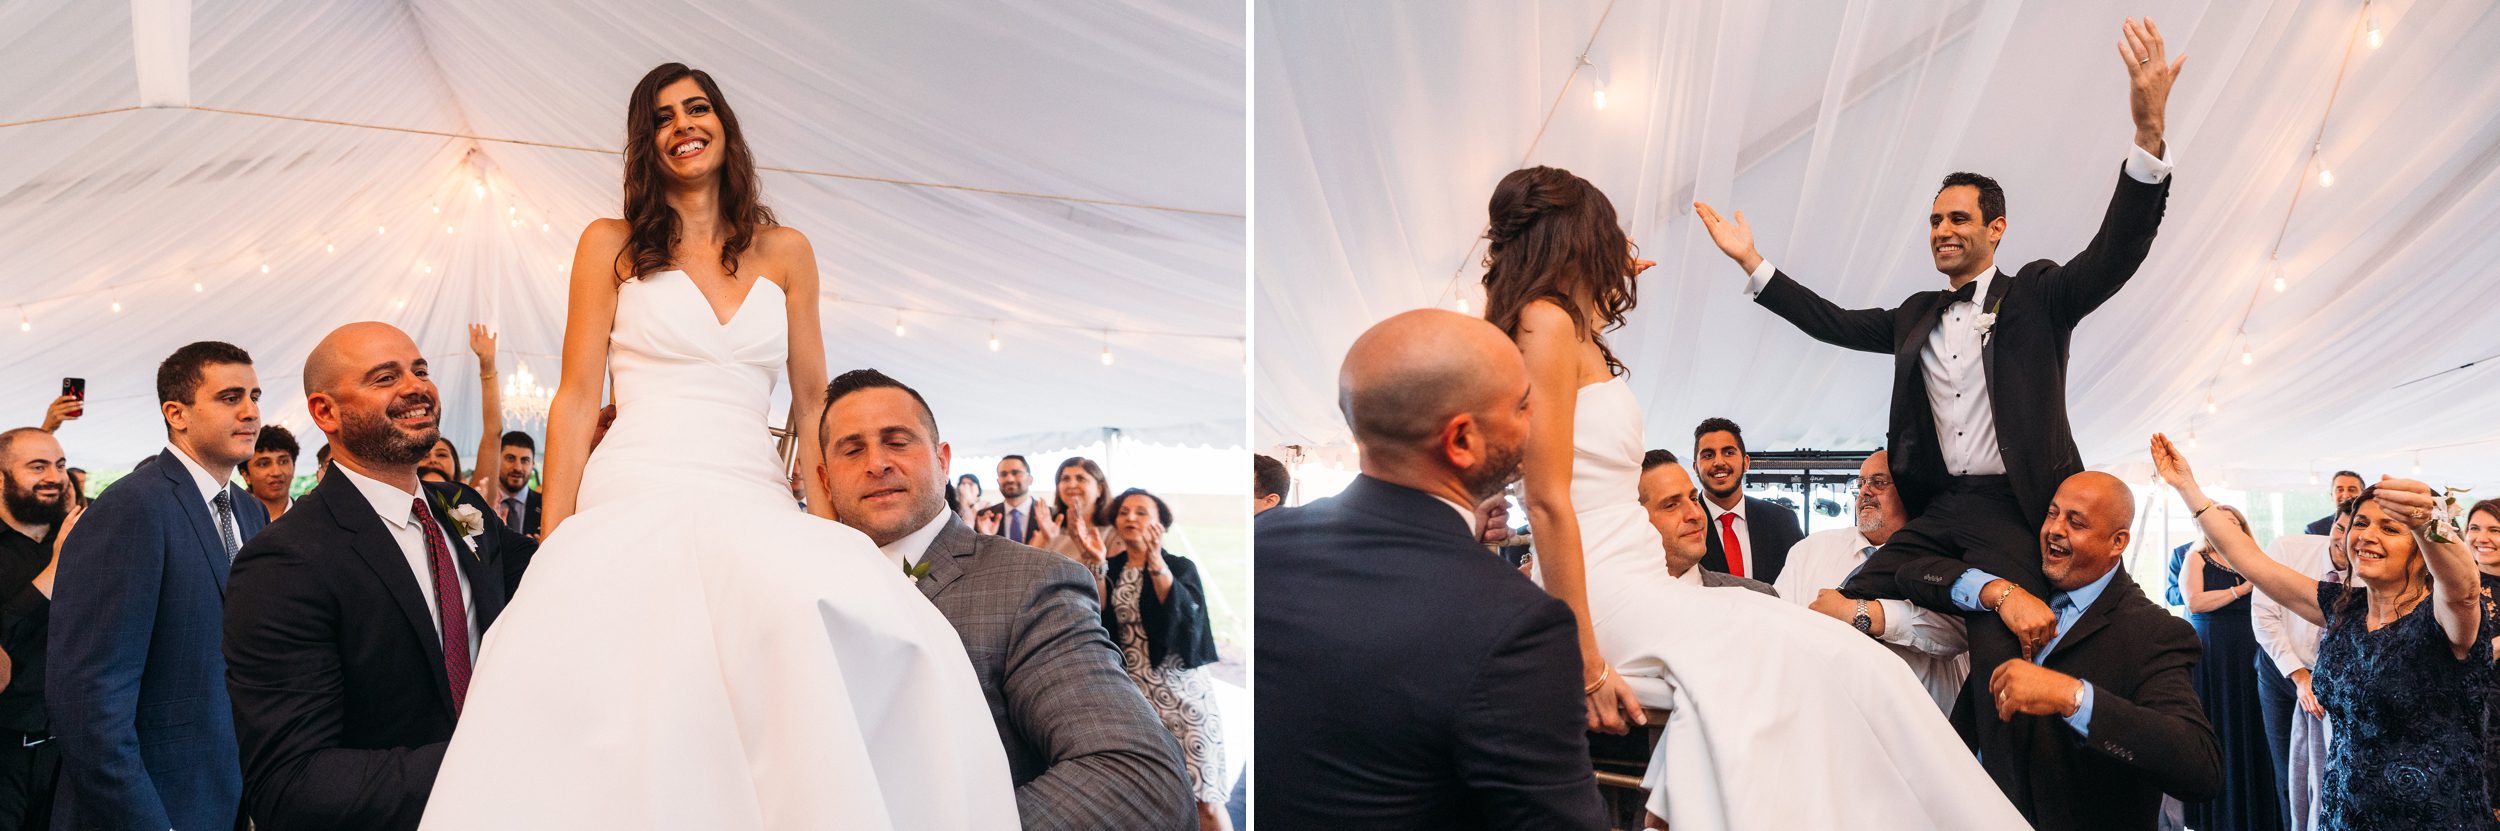 guest lifting up bride and groom on chairs during reception